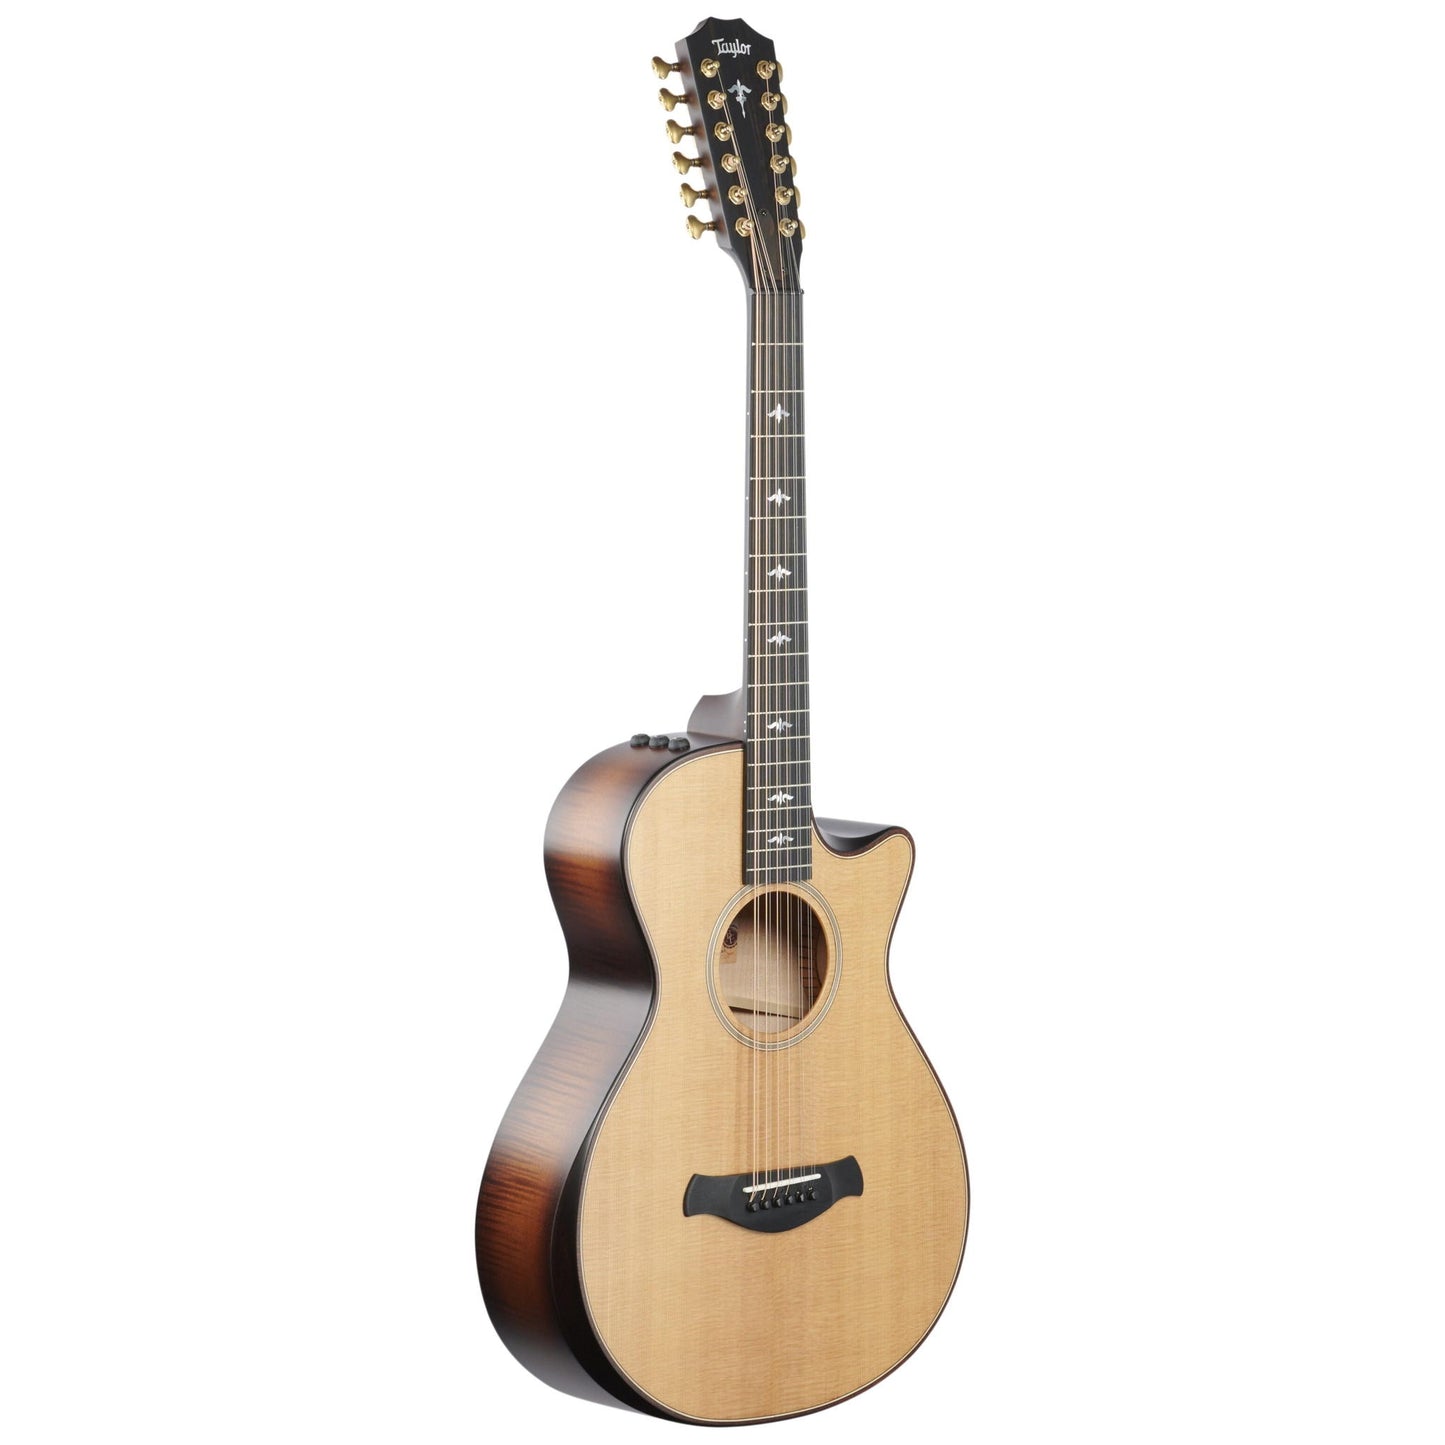 Taylor 652ce Builder's Edition 12-String Acoustic-Electric Guitar, Natural